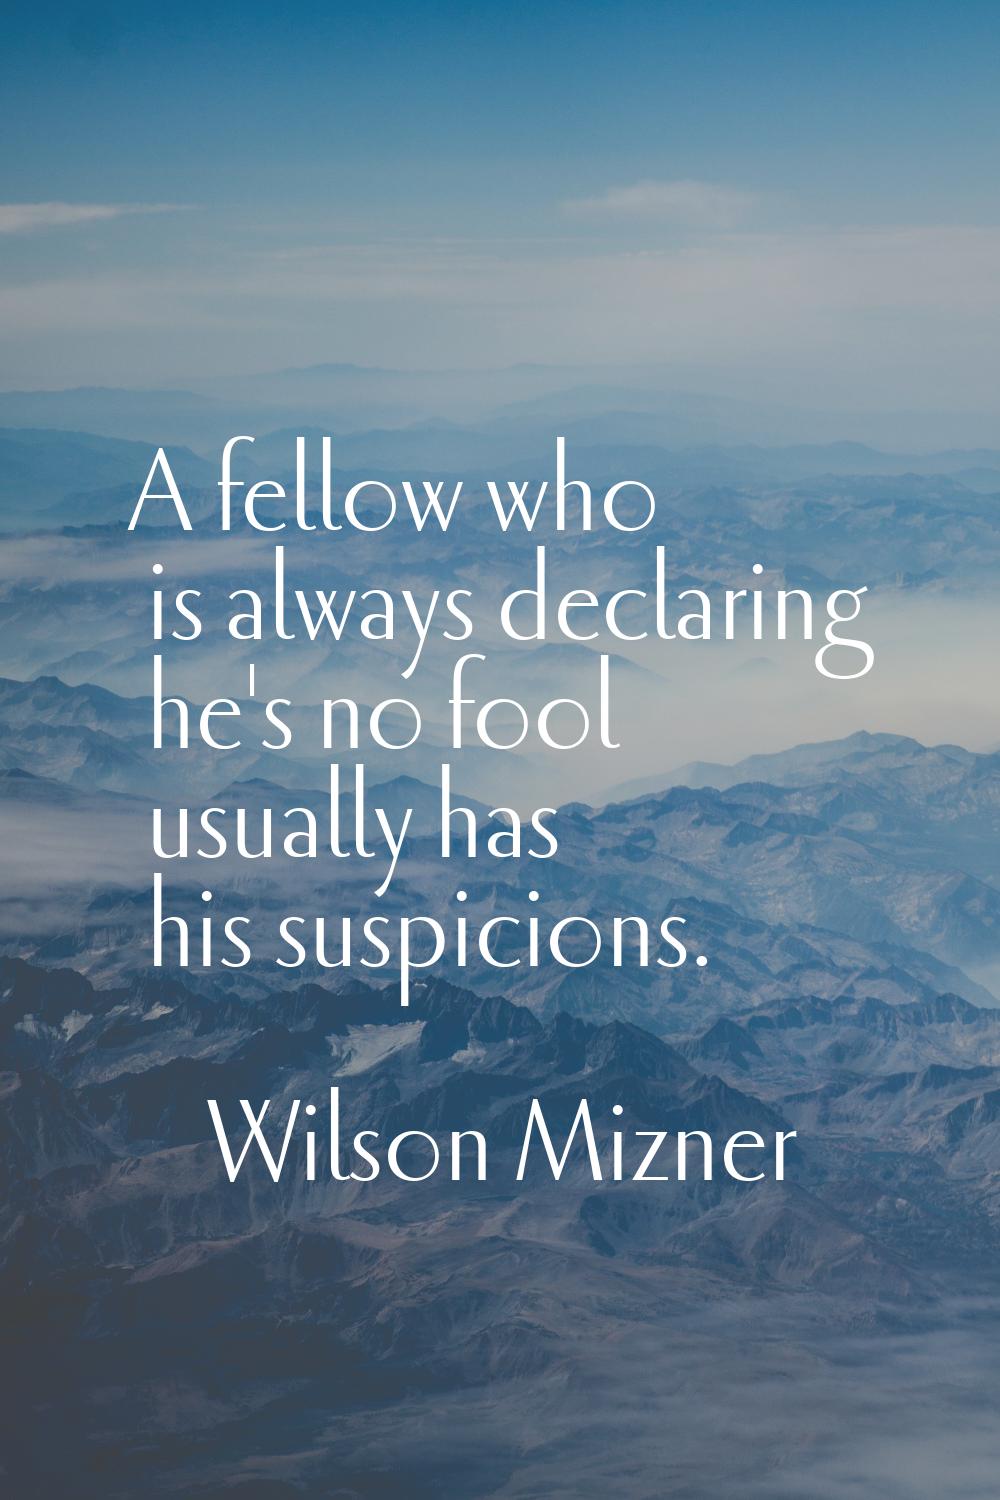 A fellow who is always declaring he's no fool usually has his suspicions.